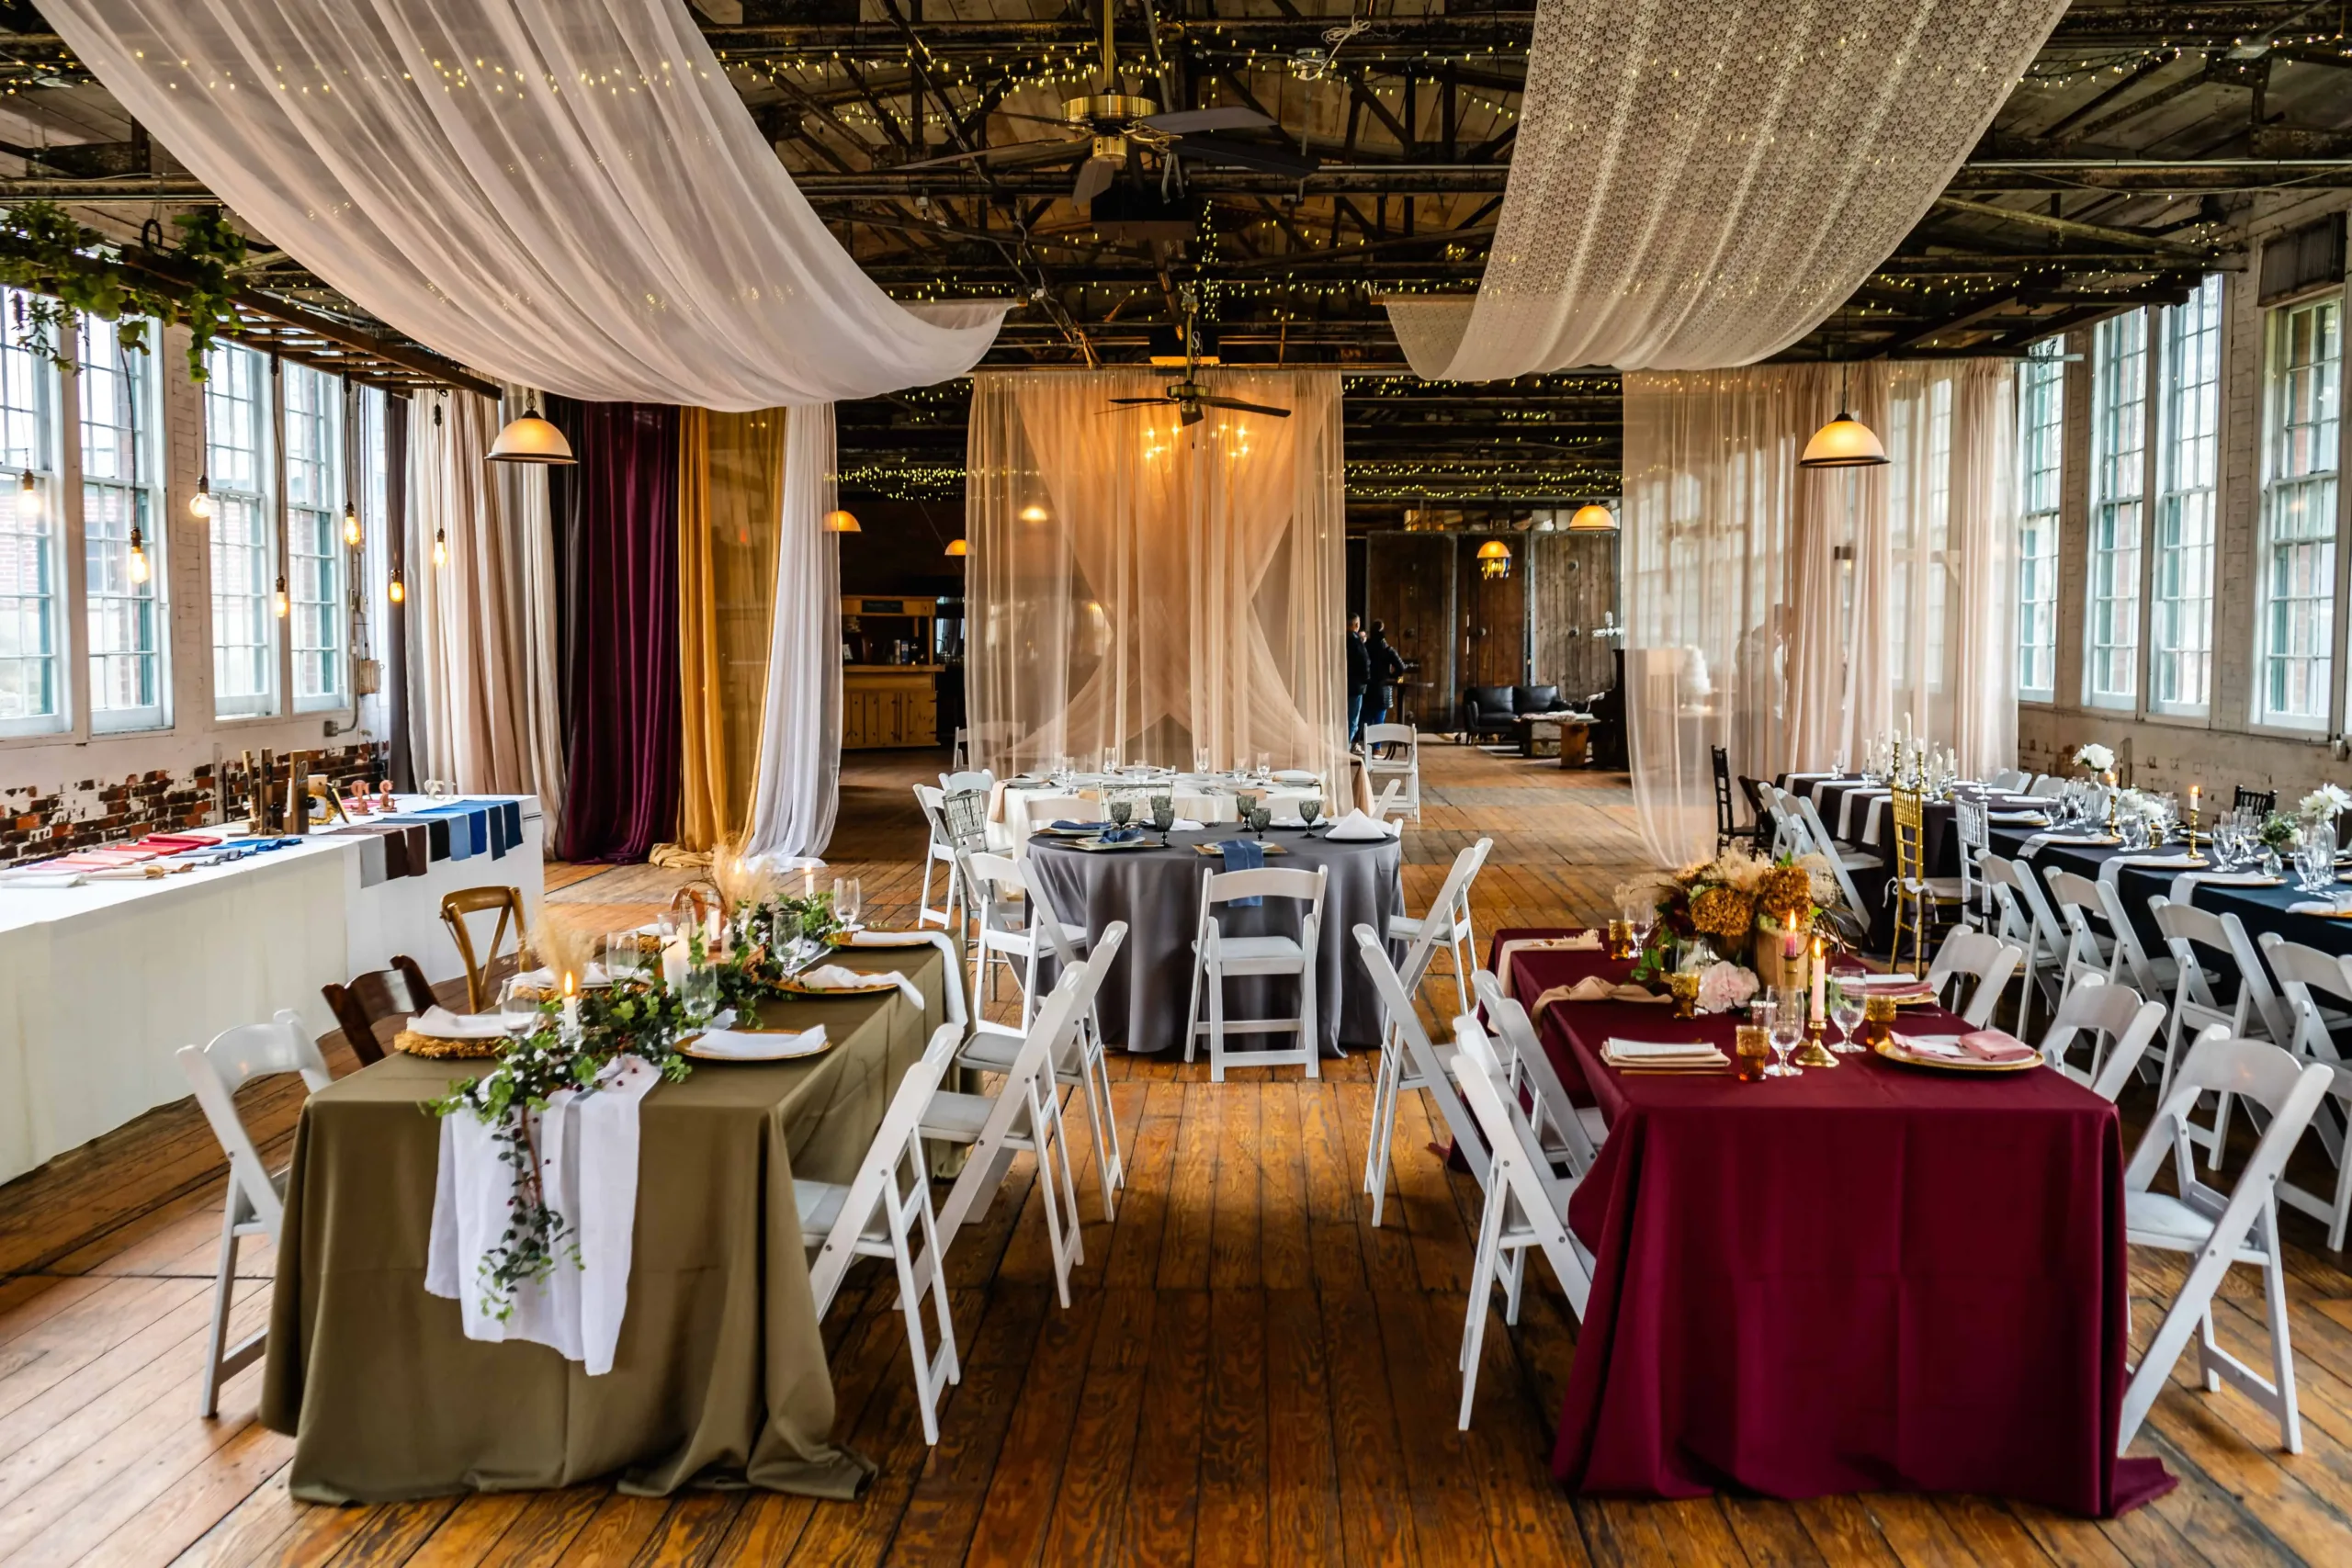 Elegant wedding reception setup at The Lace Factory in Deep River, CT, with beautifully arranged tables, soft drapery, and warm lighting, perfect for a quintessential Connecticut wedding venue.